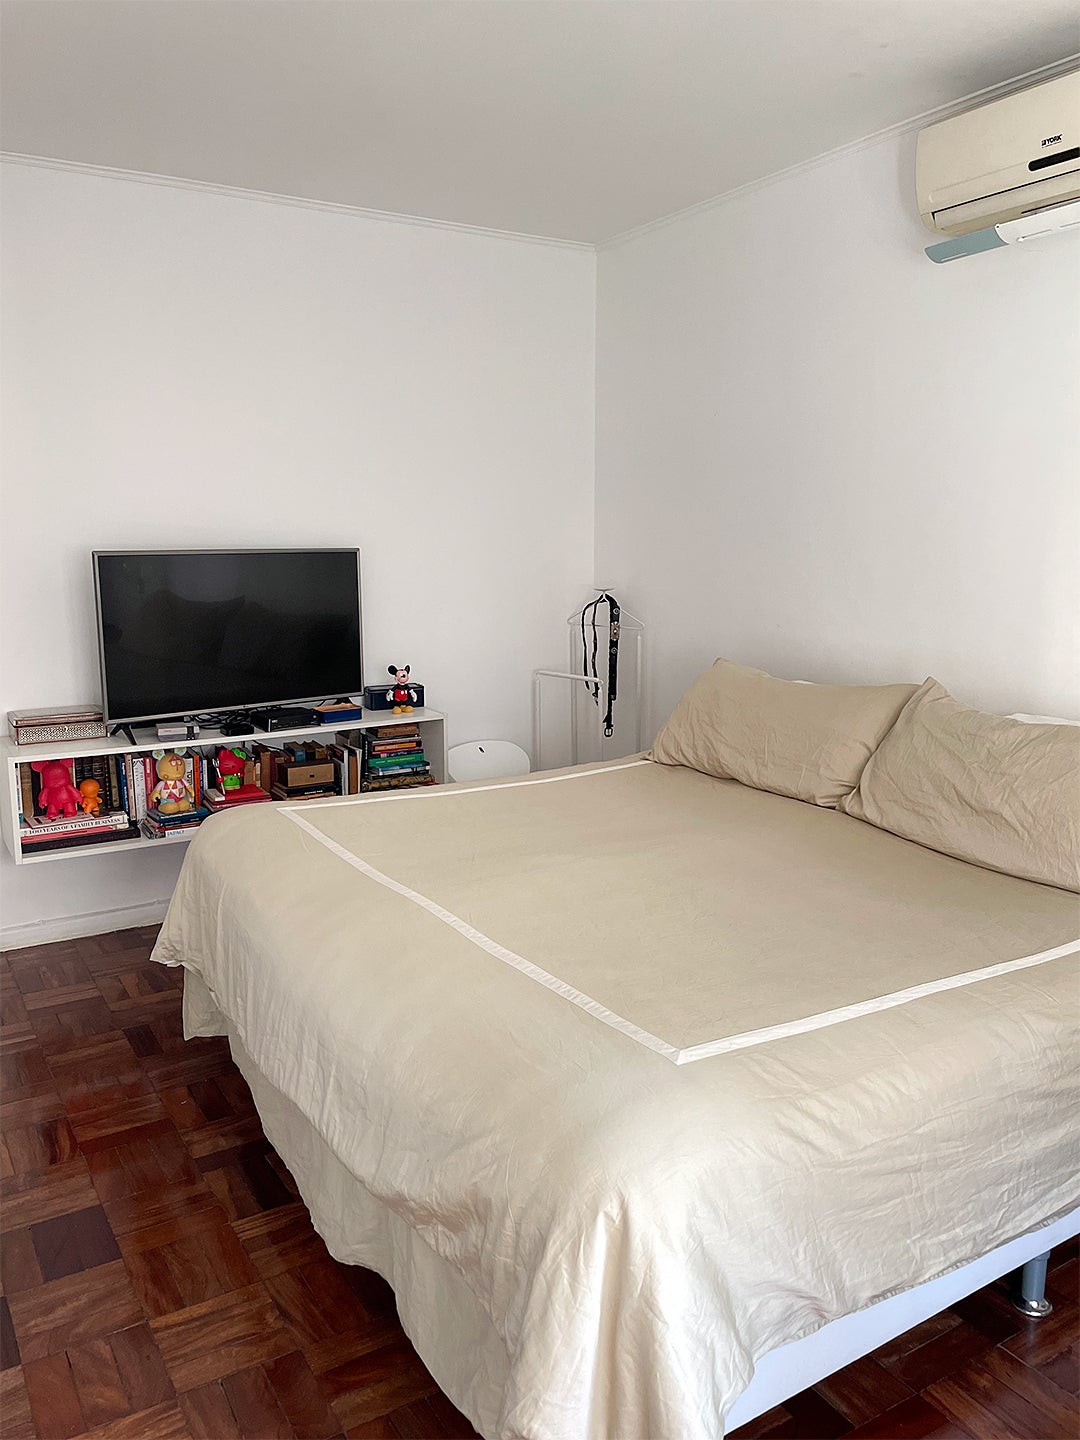 A Floating, L-Shaped Cabinet Pulls Double Duty in This São Paulo Bedroom